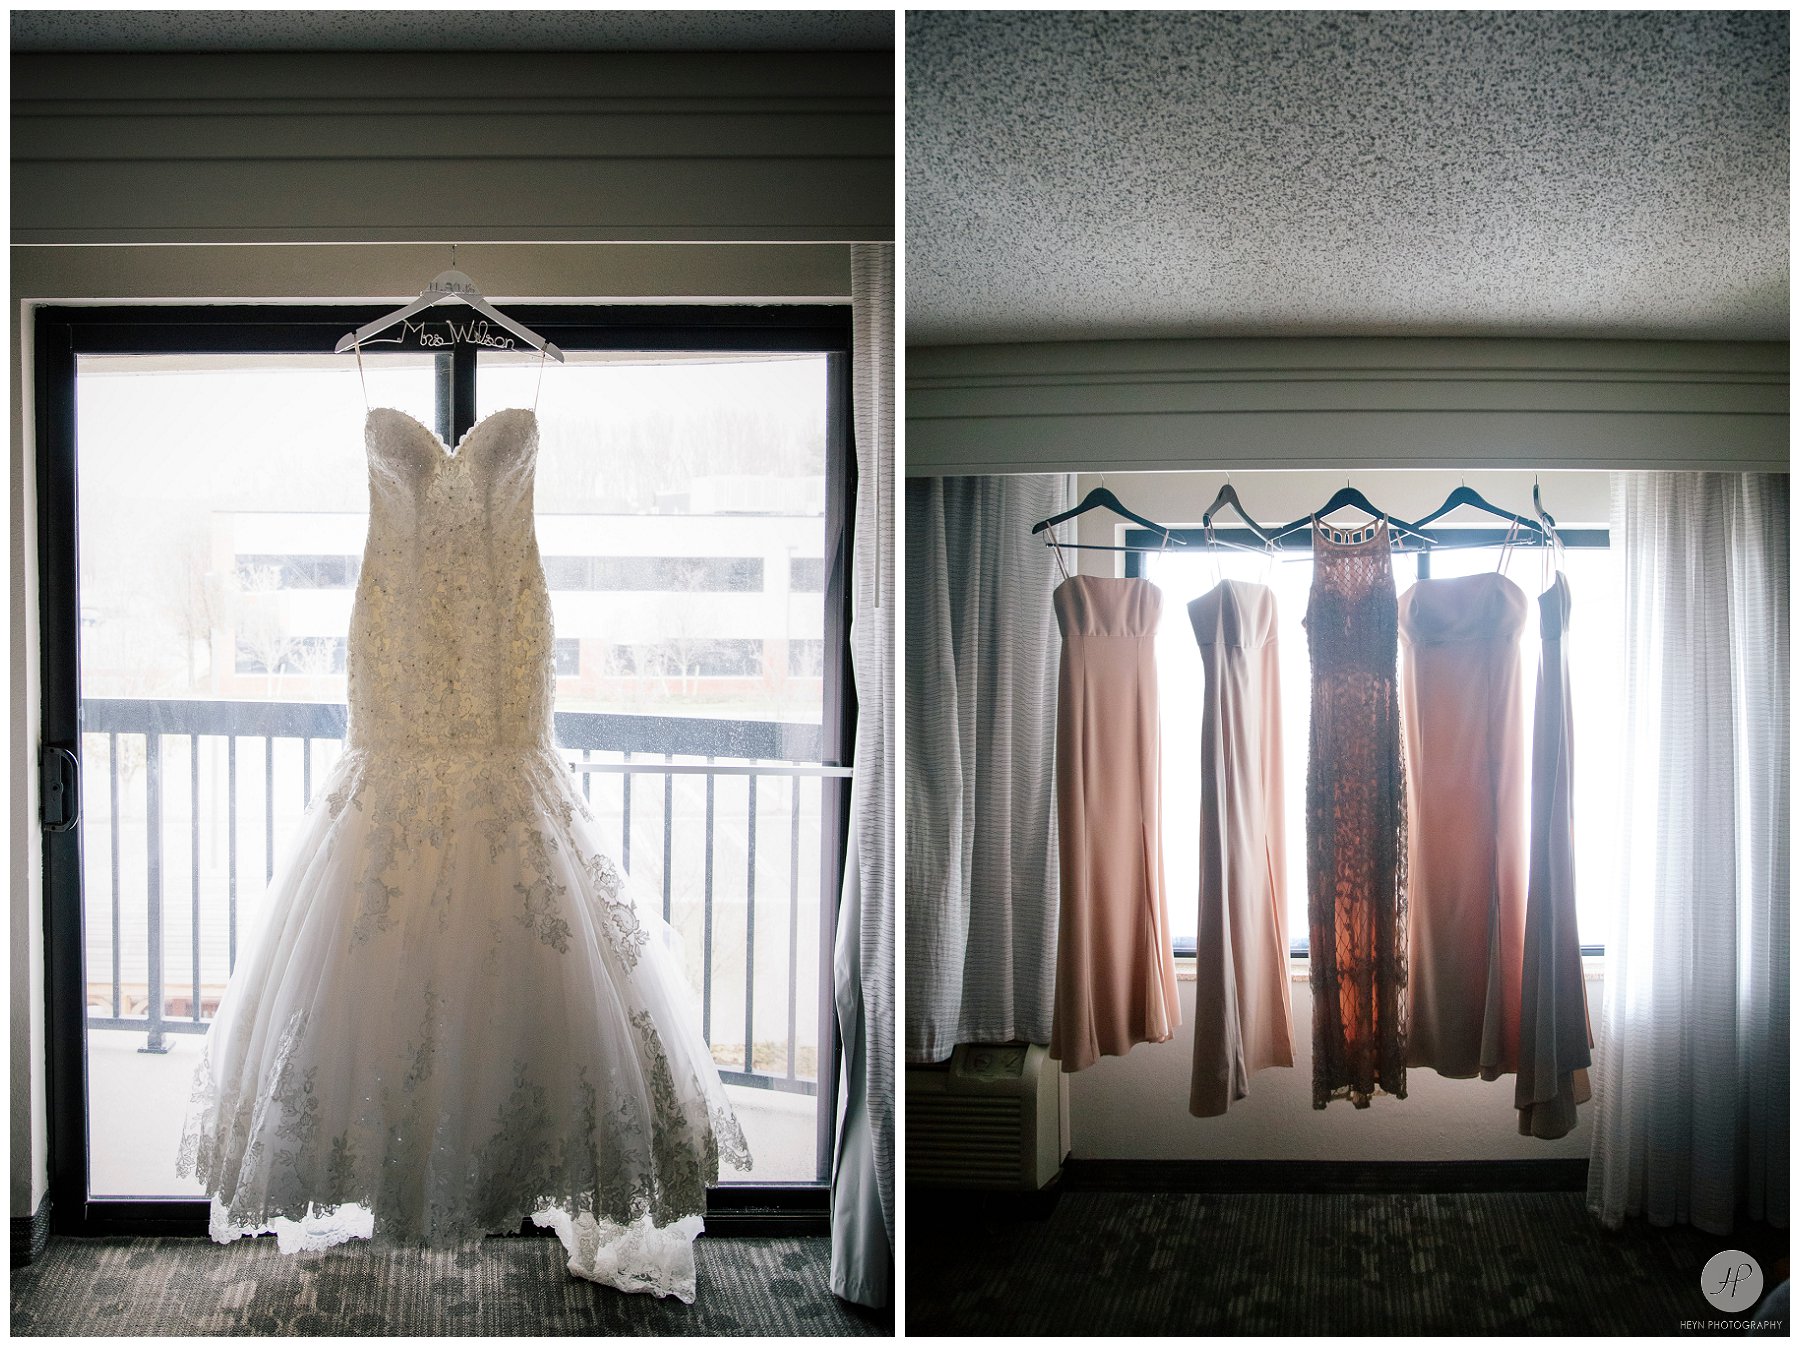 classic brides gown and bridesmaid dresses for clarks landing yacht club wedding in NJ